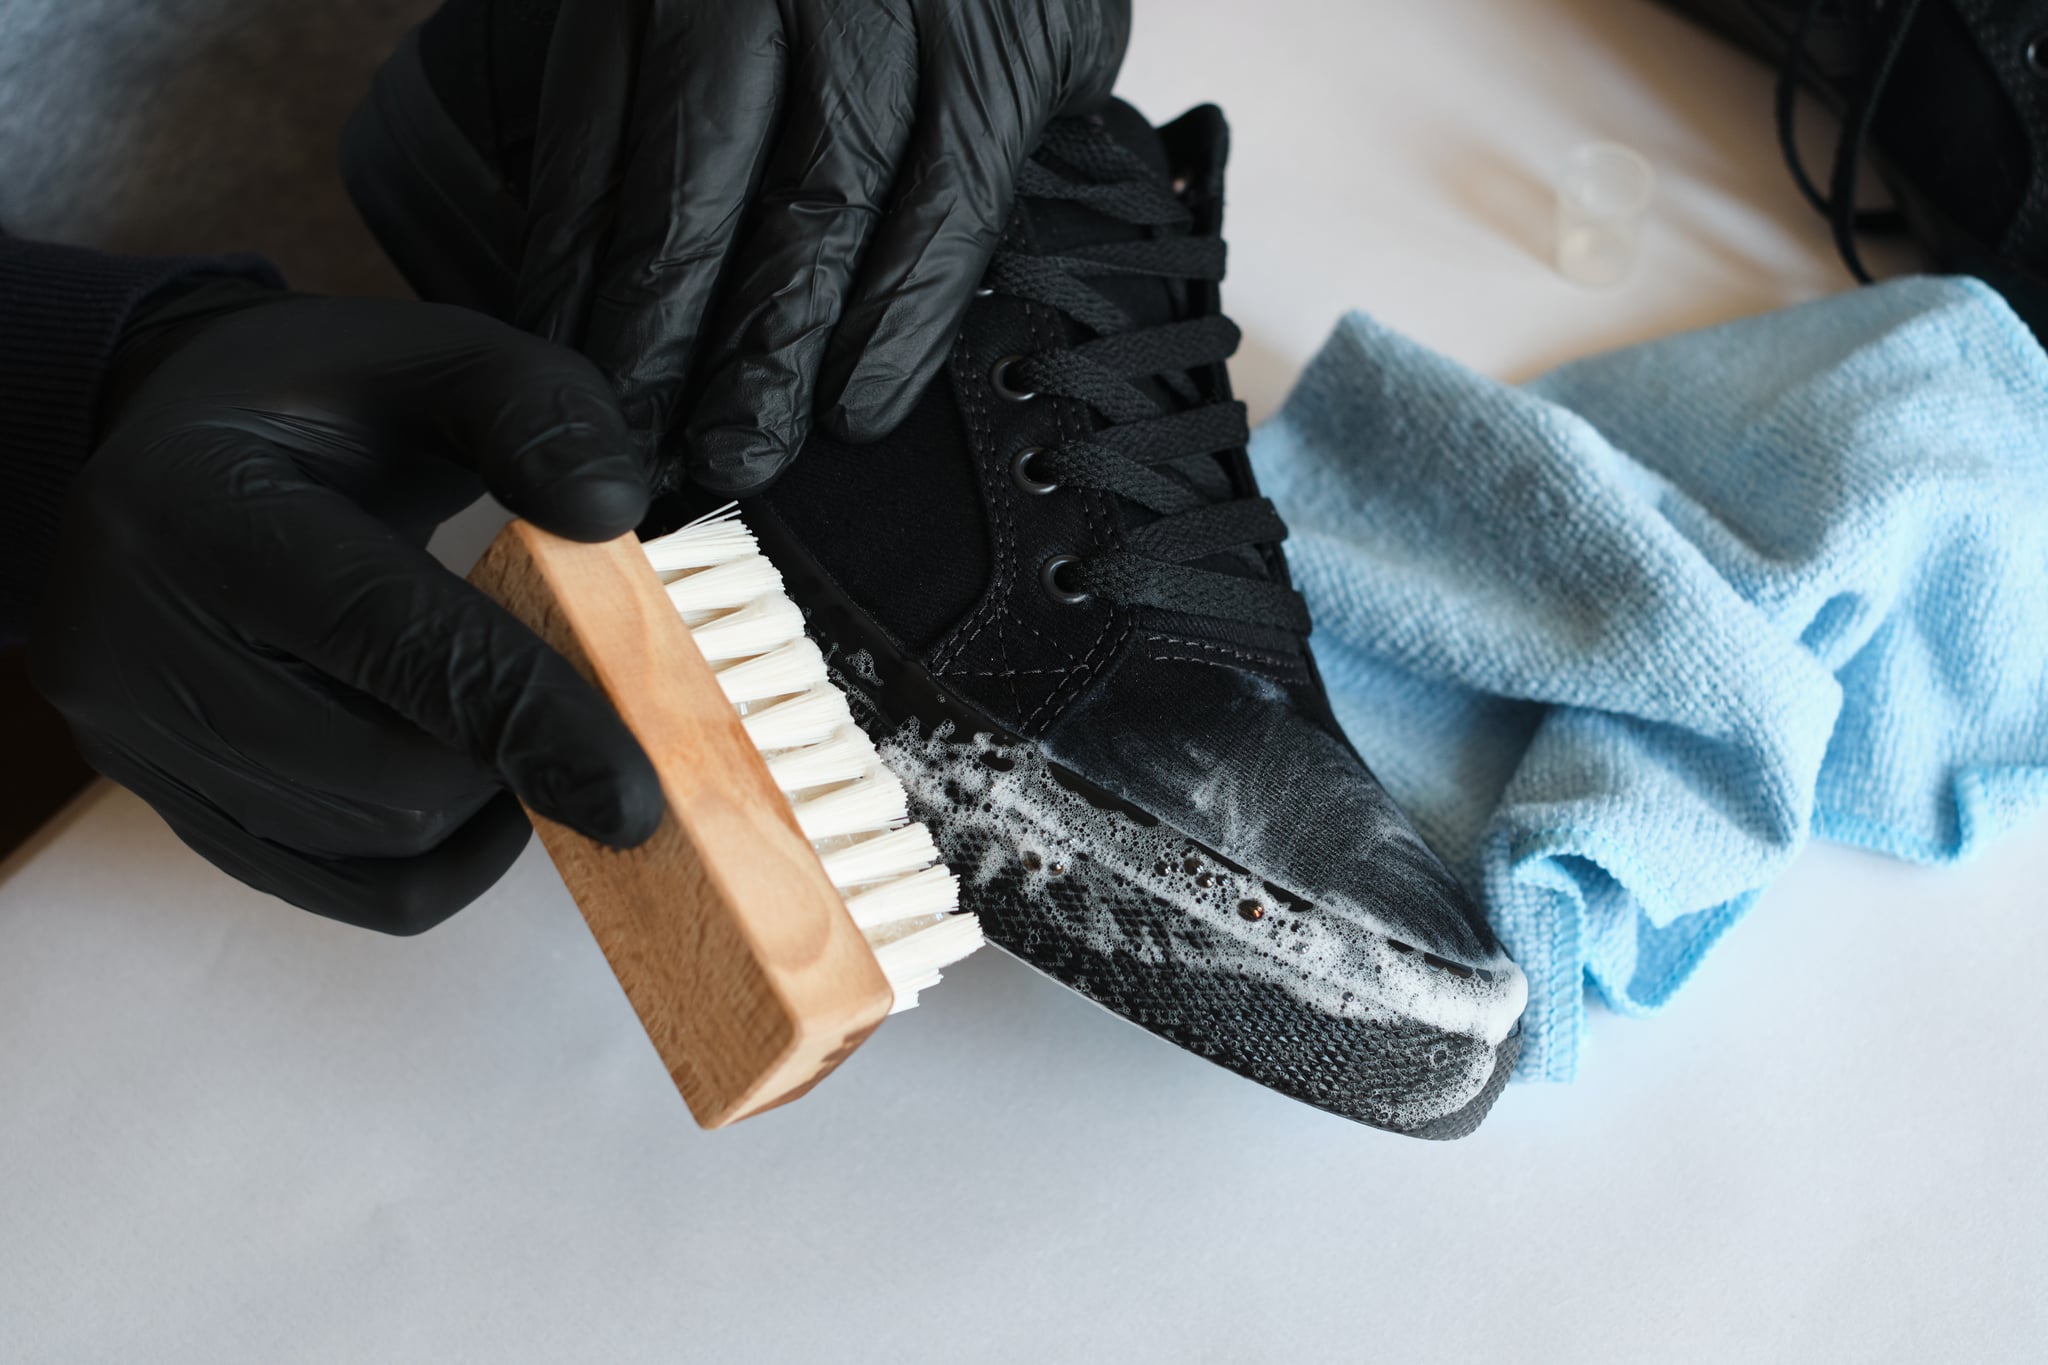 How to Clean Sneakers According to an Expert